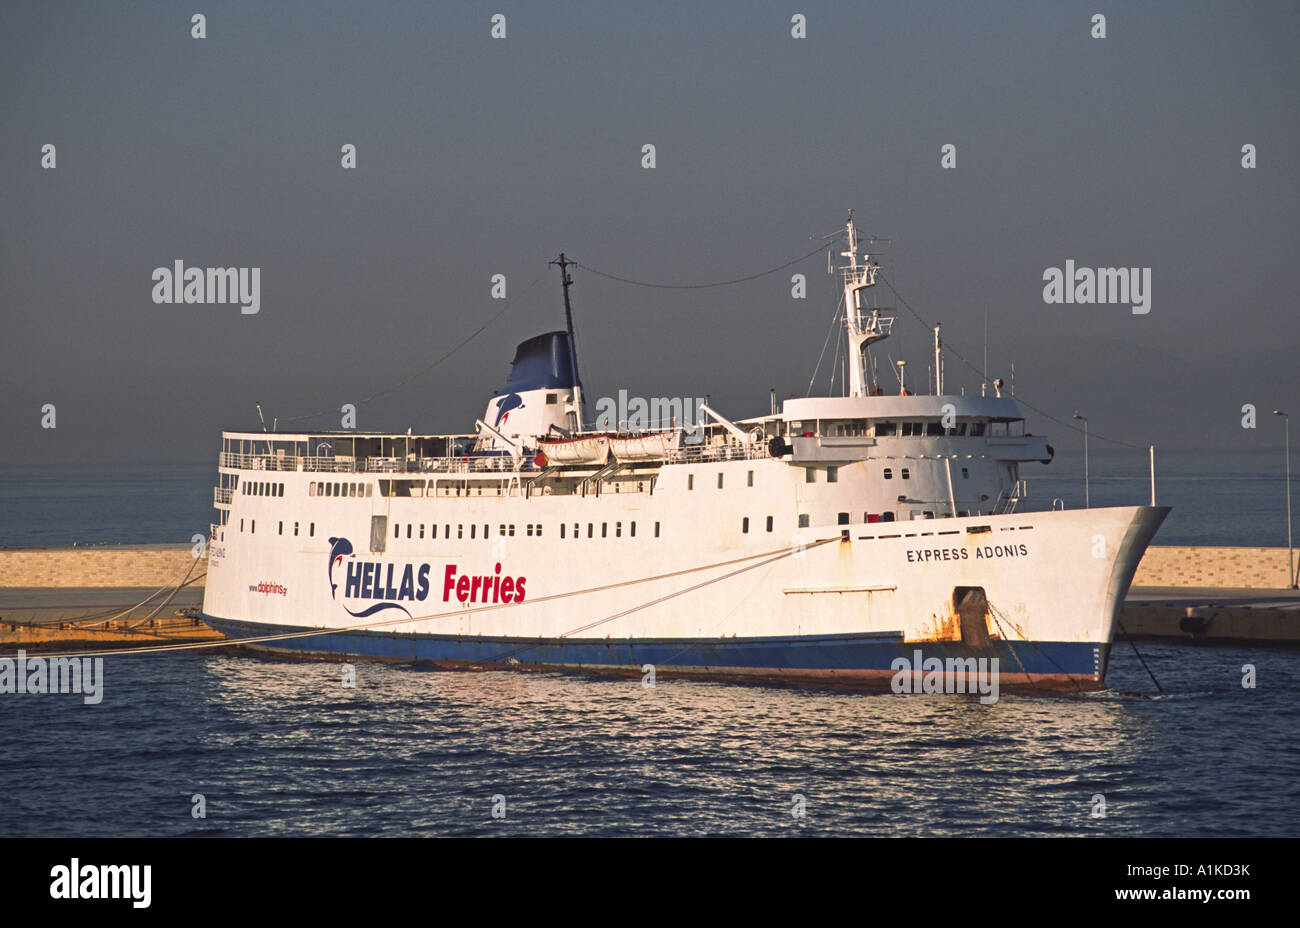 Express Adonis laid up at Piraeus. The Hellas Ferries ship has since ...